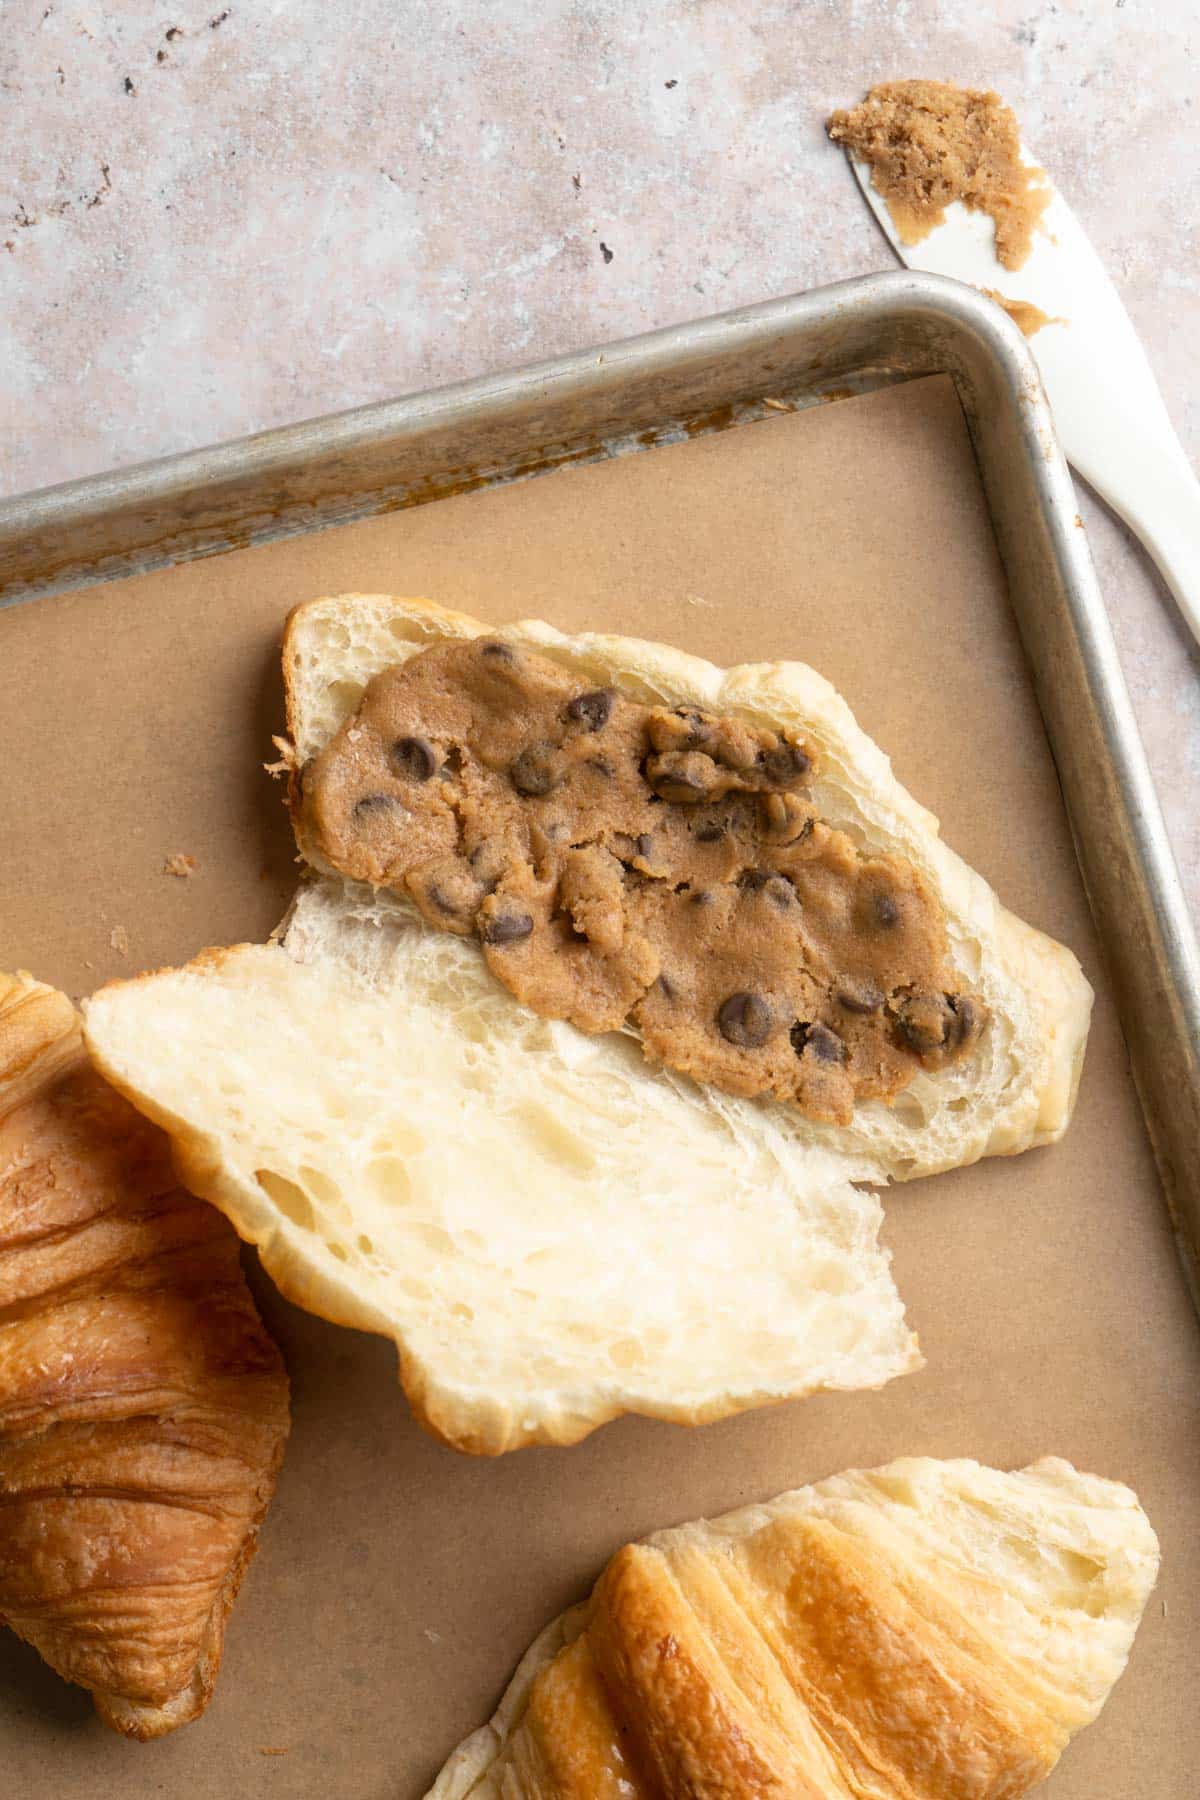 Adding chocolate chip cookie dough to the center of a croissant.